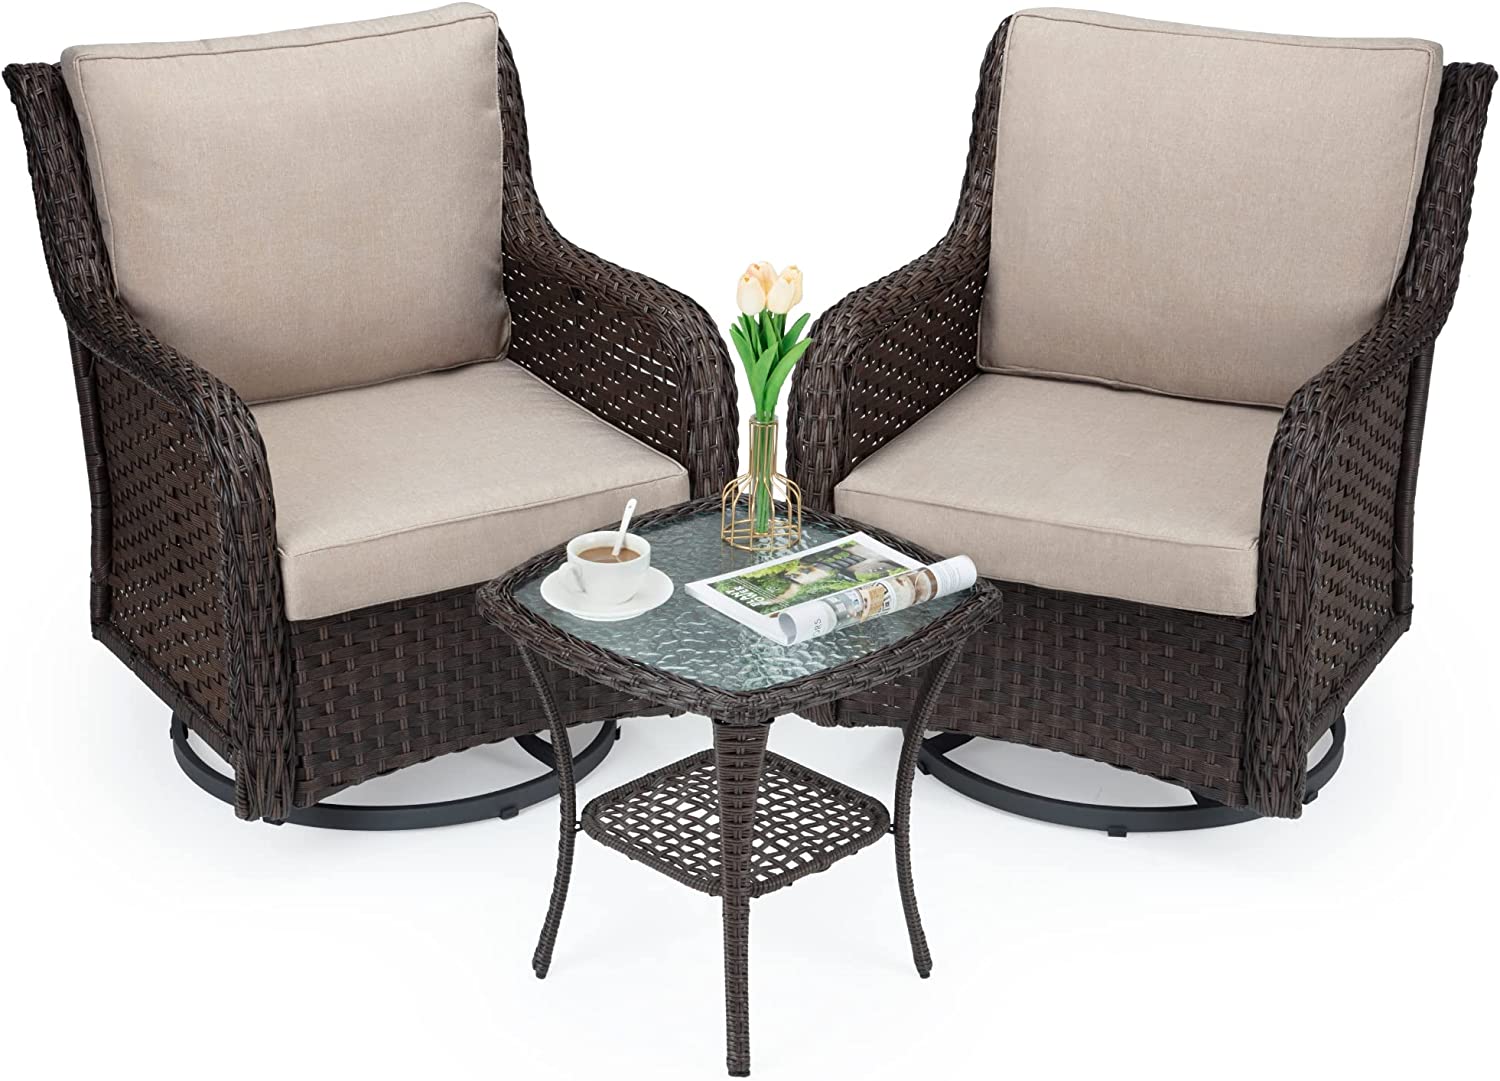 Outdoor 360° Swivel Rocker Patio Chairs Set of 2 and Matching End Table, IDEALHOUSE 3 Pieces Wicker Patio Bistro Set with Premium Fabric Cushions for Yard, Garden, Balcony (Beige, Encryption Rattan) - image 2 of 7